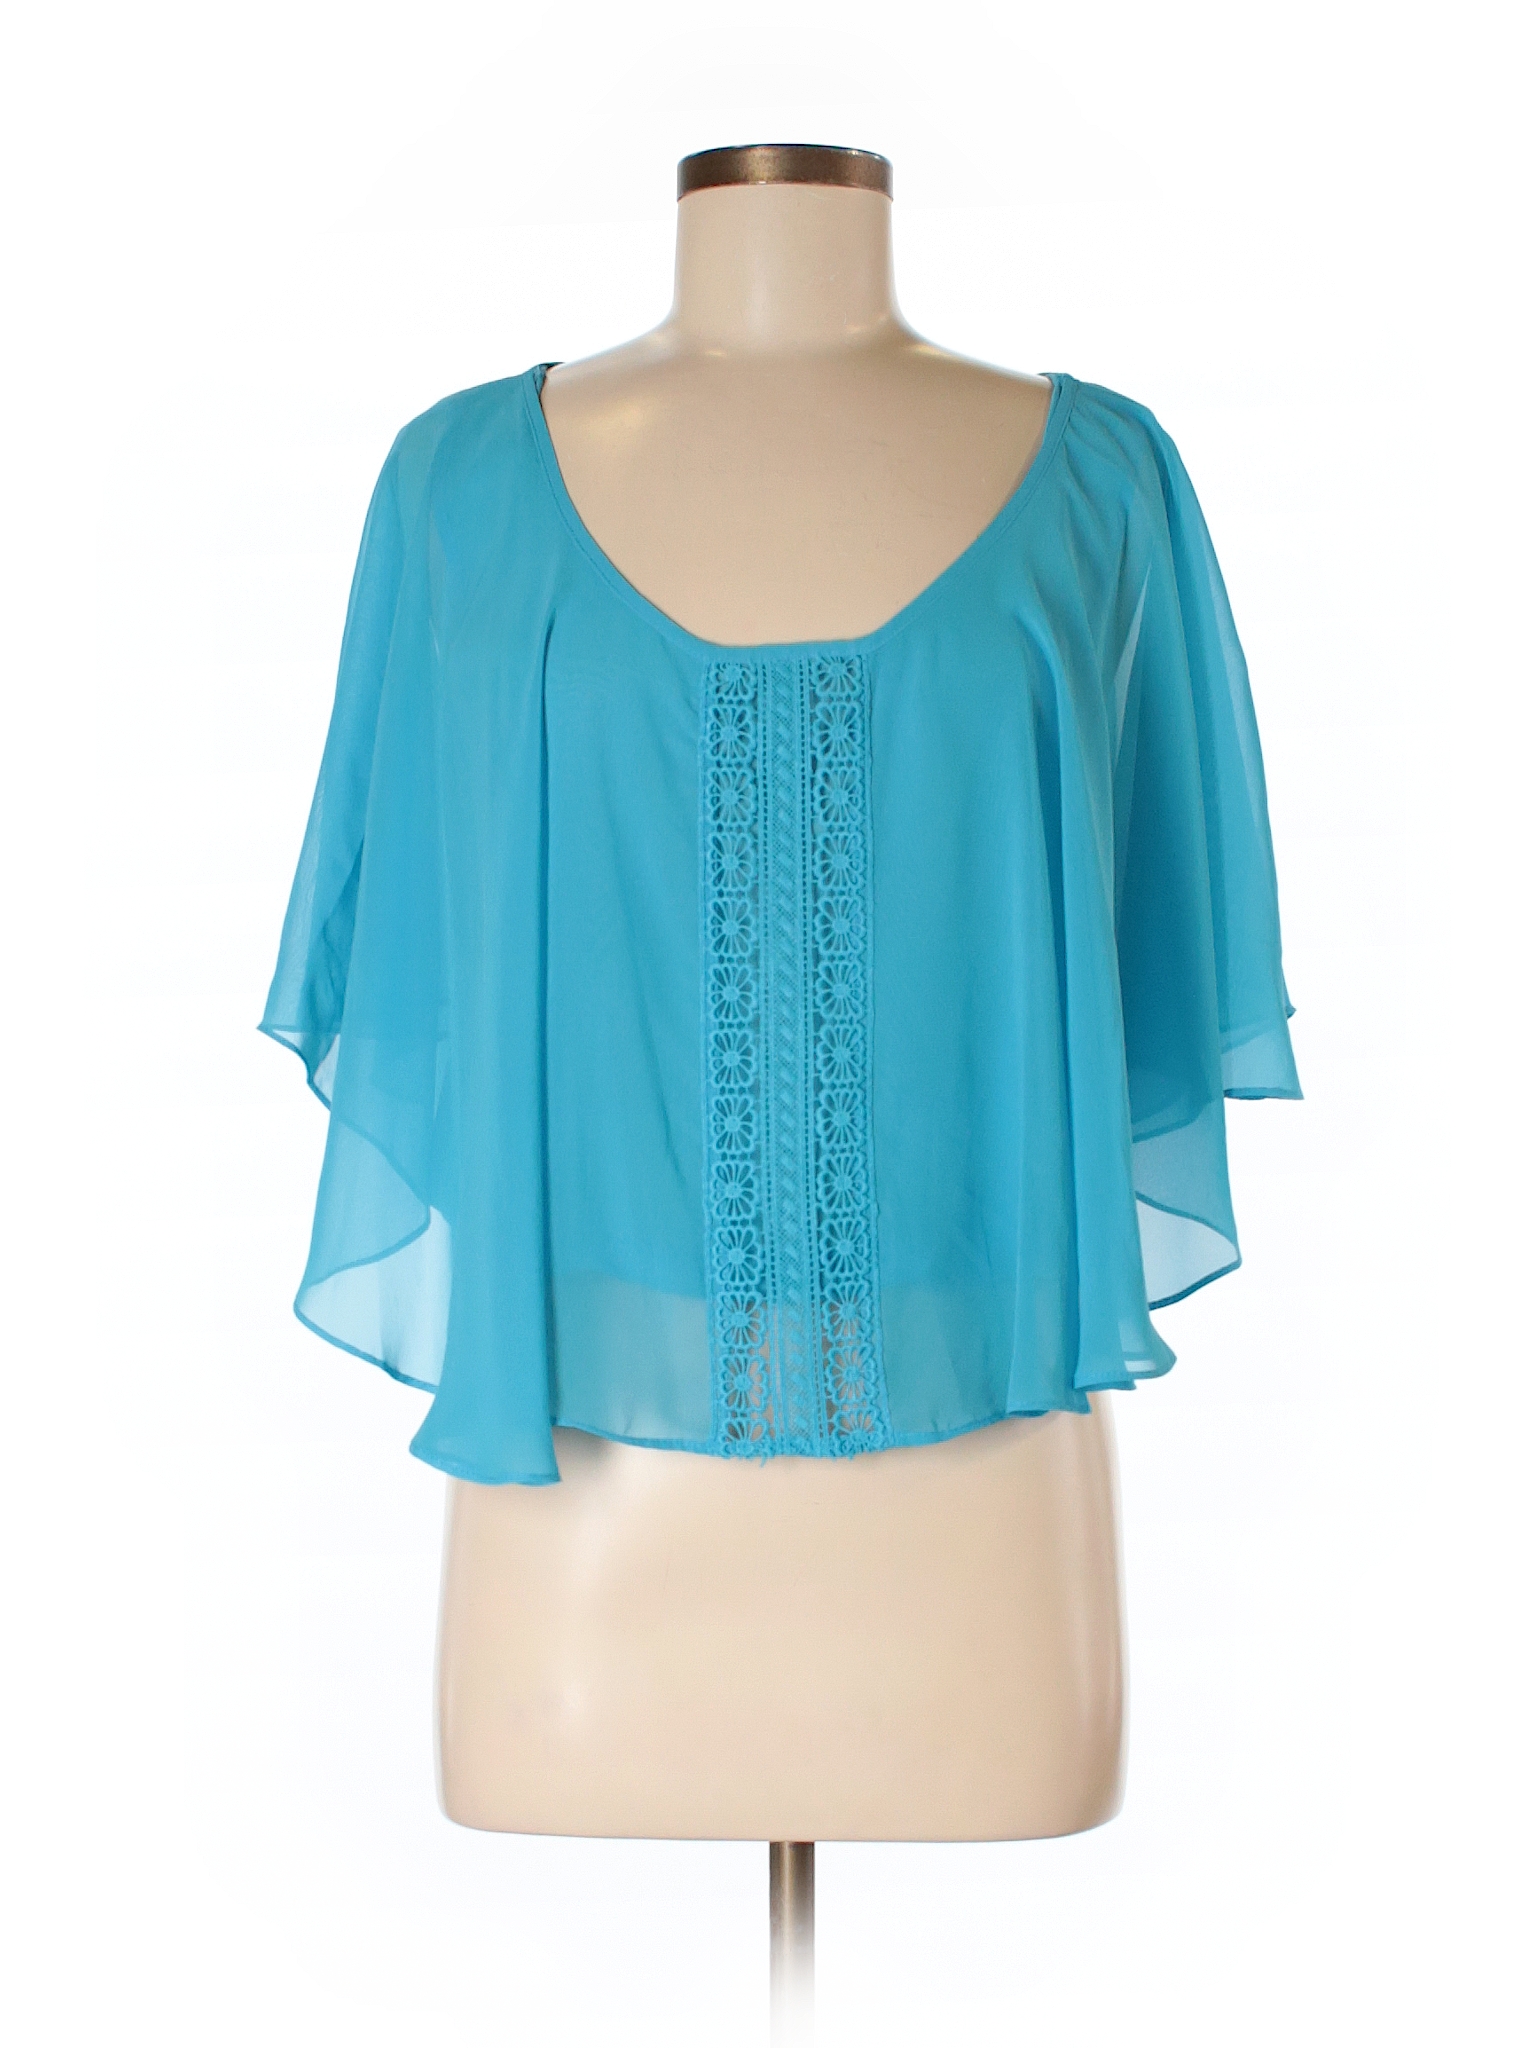 Love By Design 100% Polyester Solid Light Blue 3/4 Sleeve Blouse Size M ...